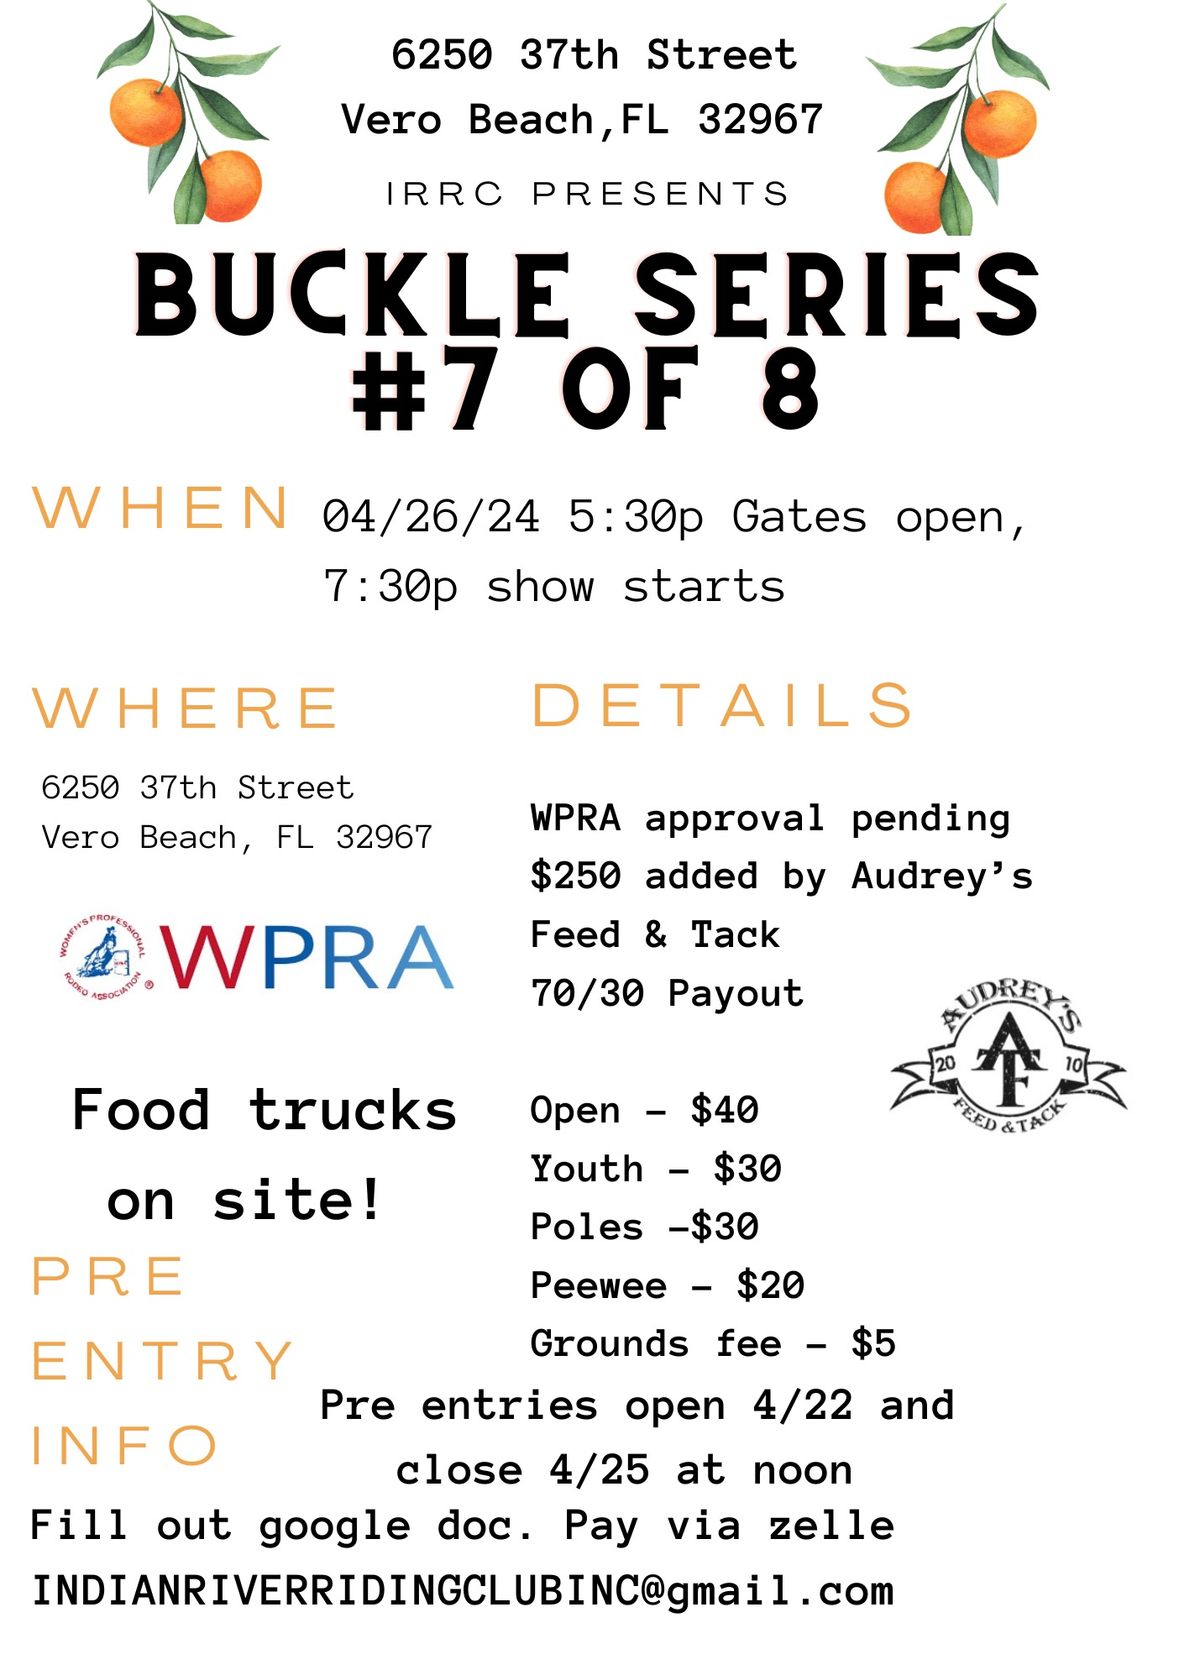 IRRC $250 added Buckle series #7 of 8 